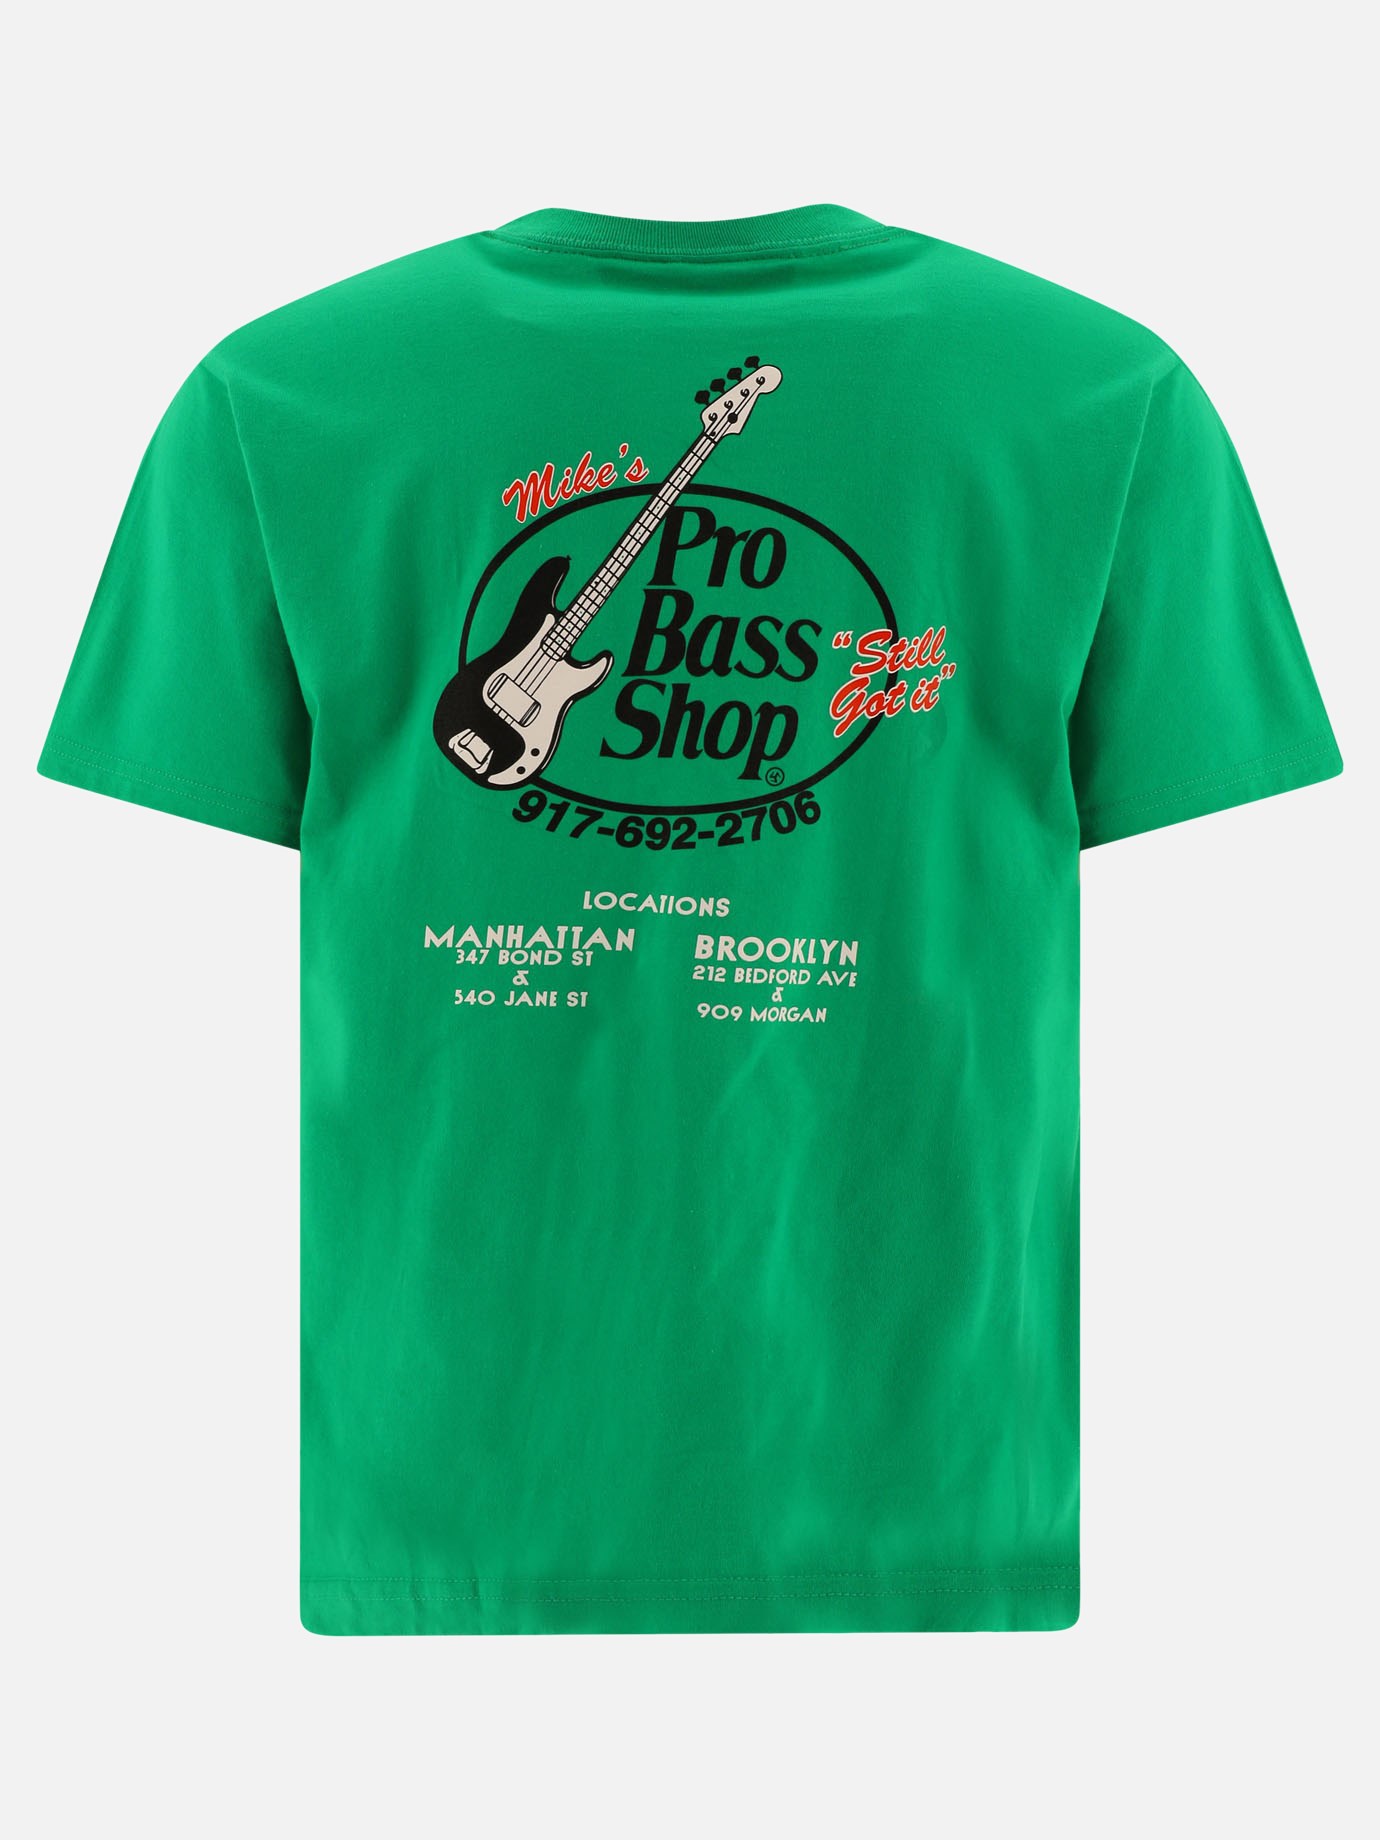  Pro Bass  t-shirt by Call Me 917